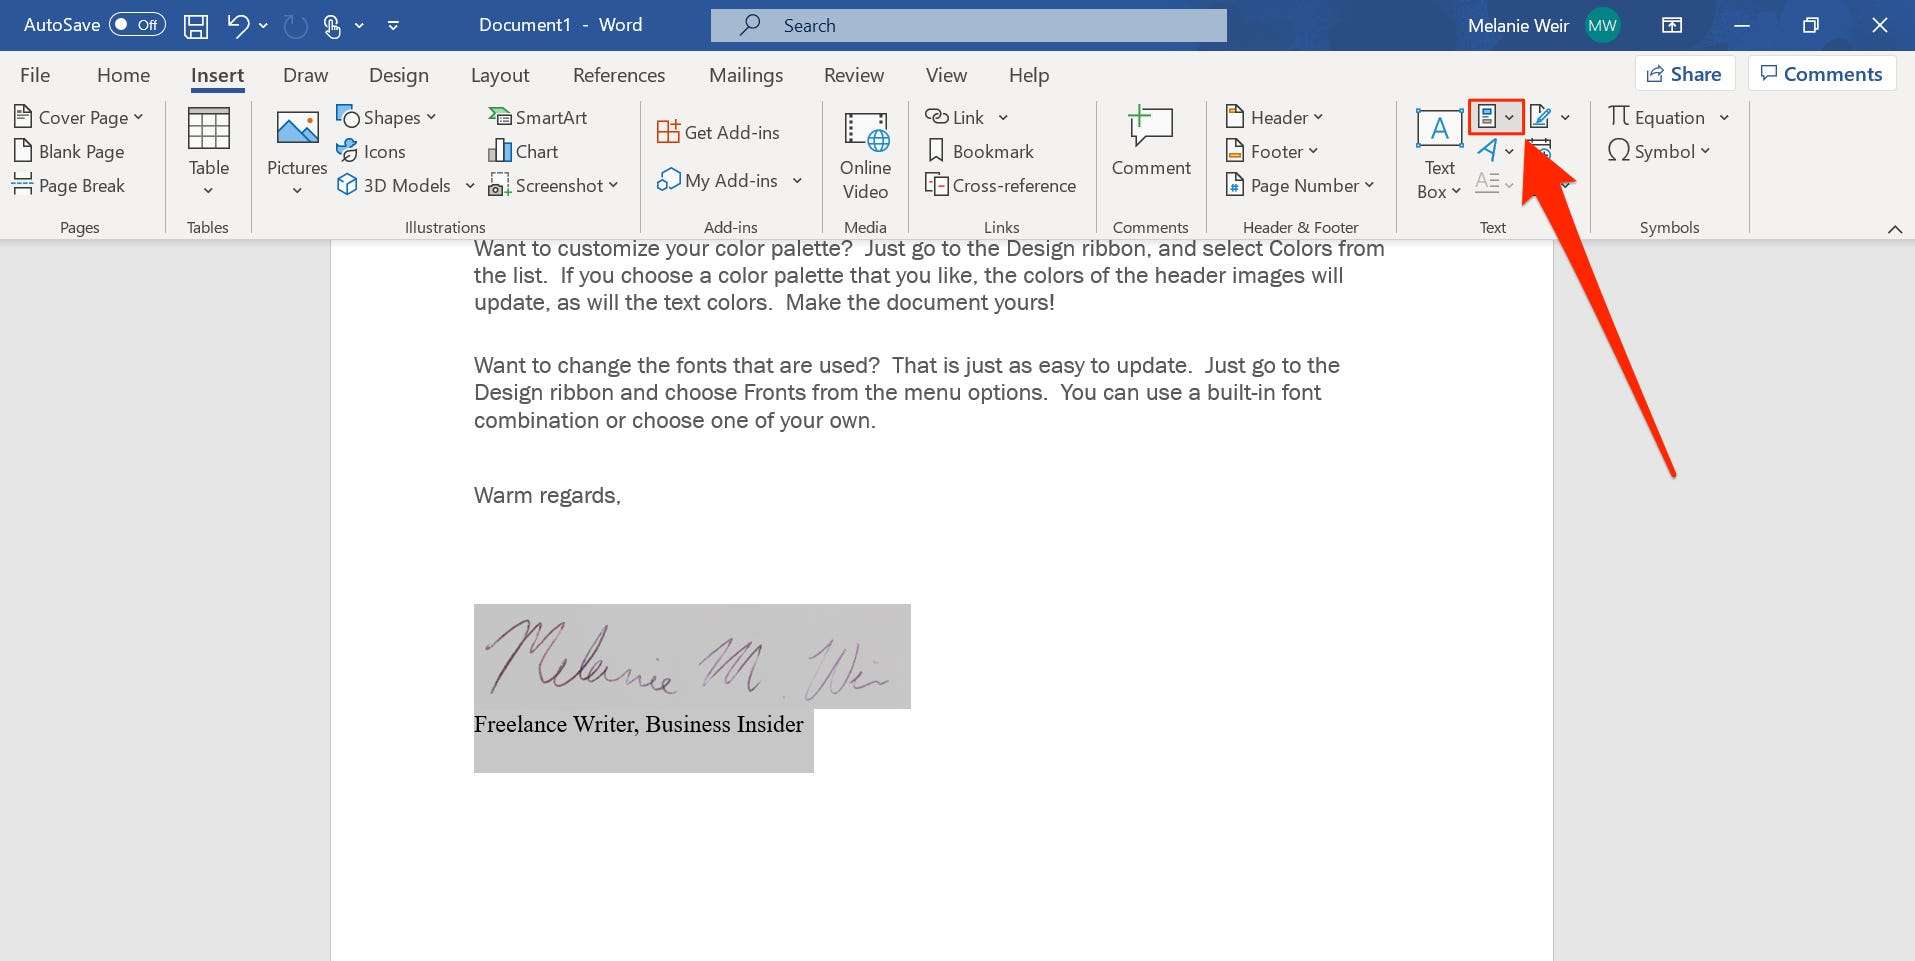 How to add a signature in a Microsoft Word document on a PC or Mac